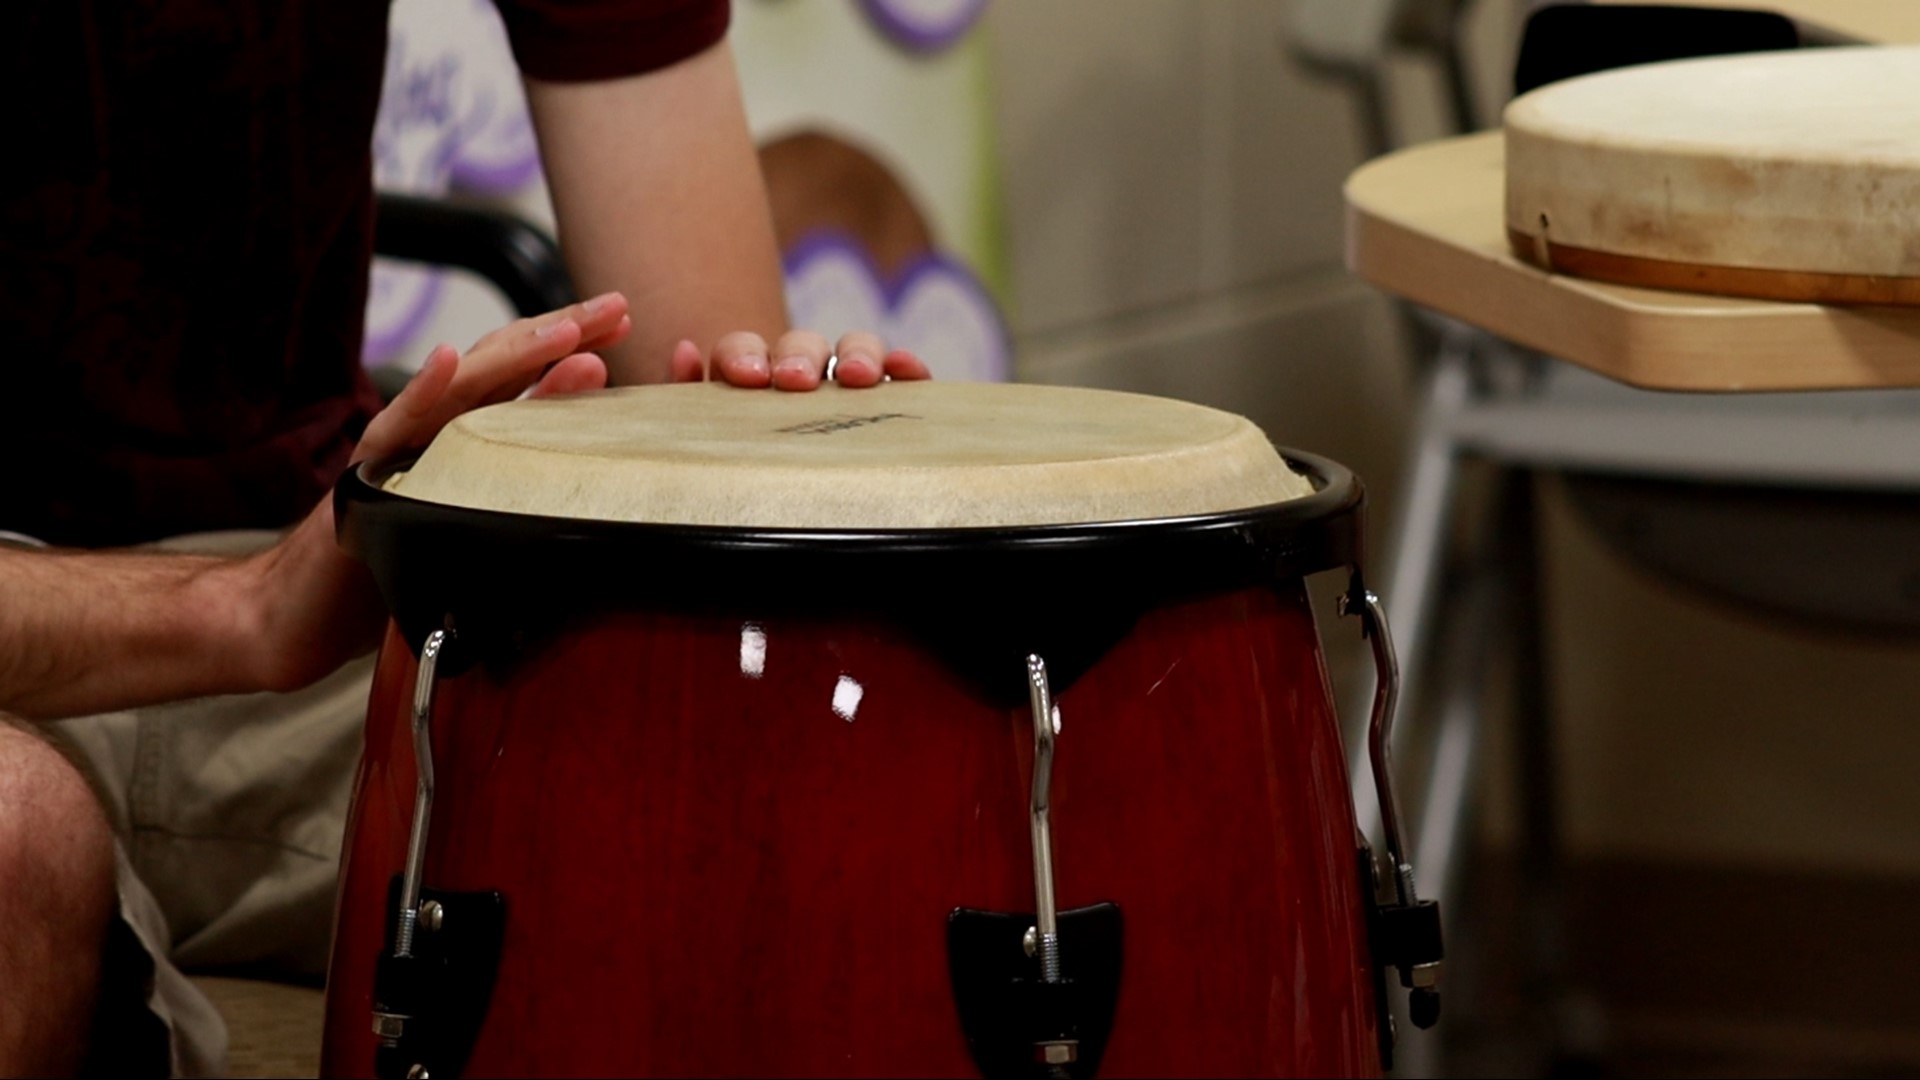 The Southern Center for Choice Theory offers courses about choosing peace, drum circles and more.